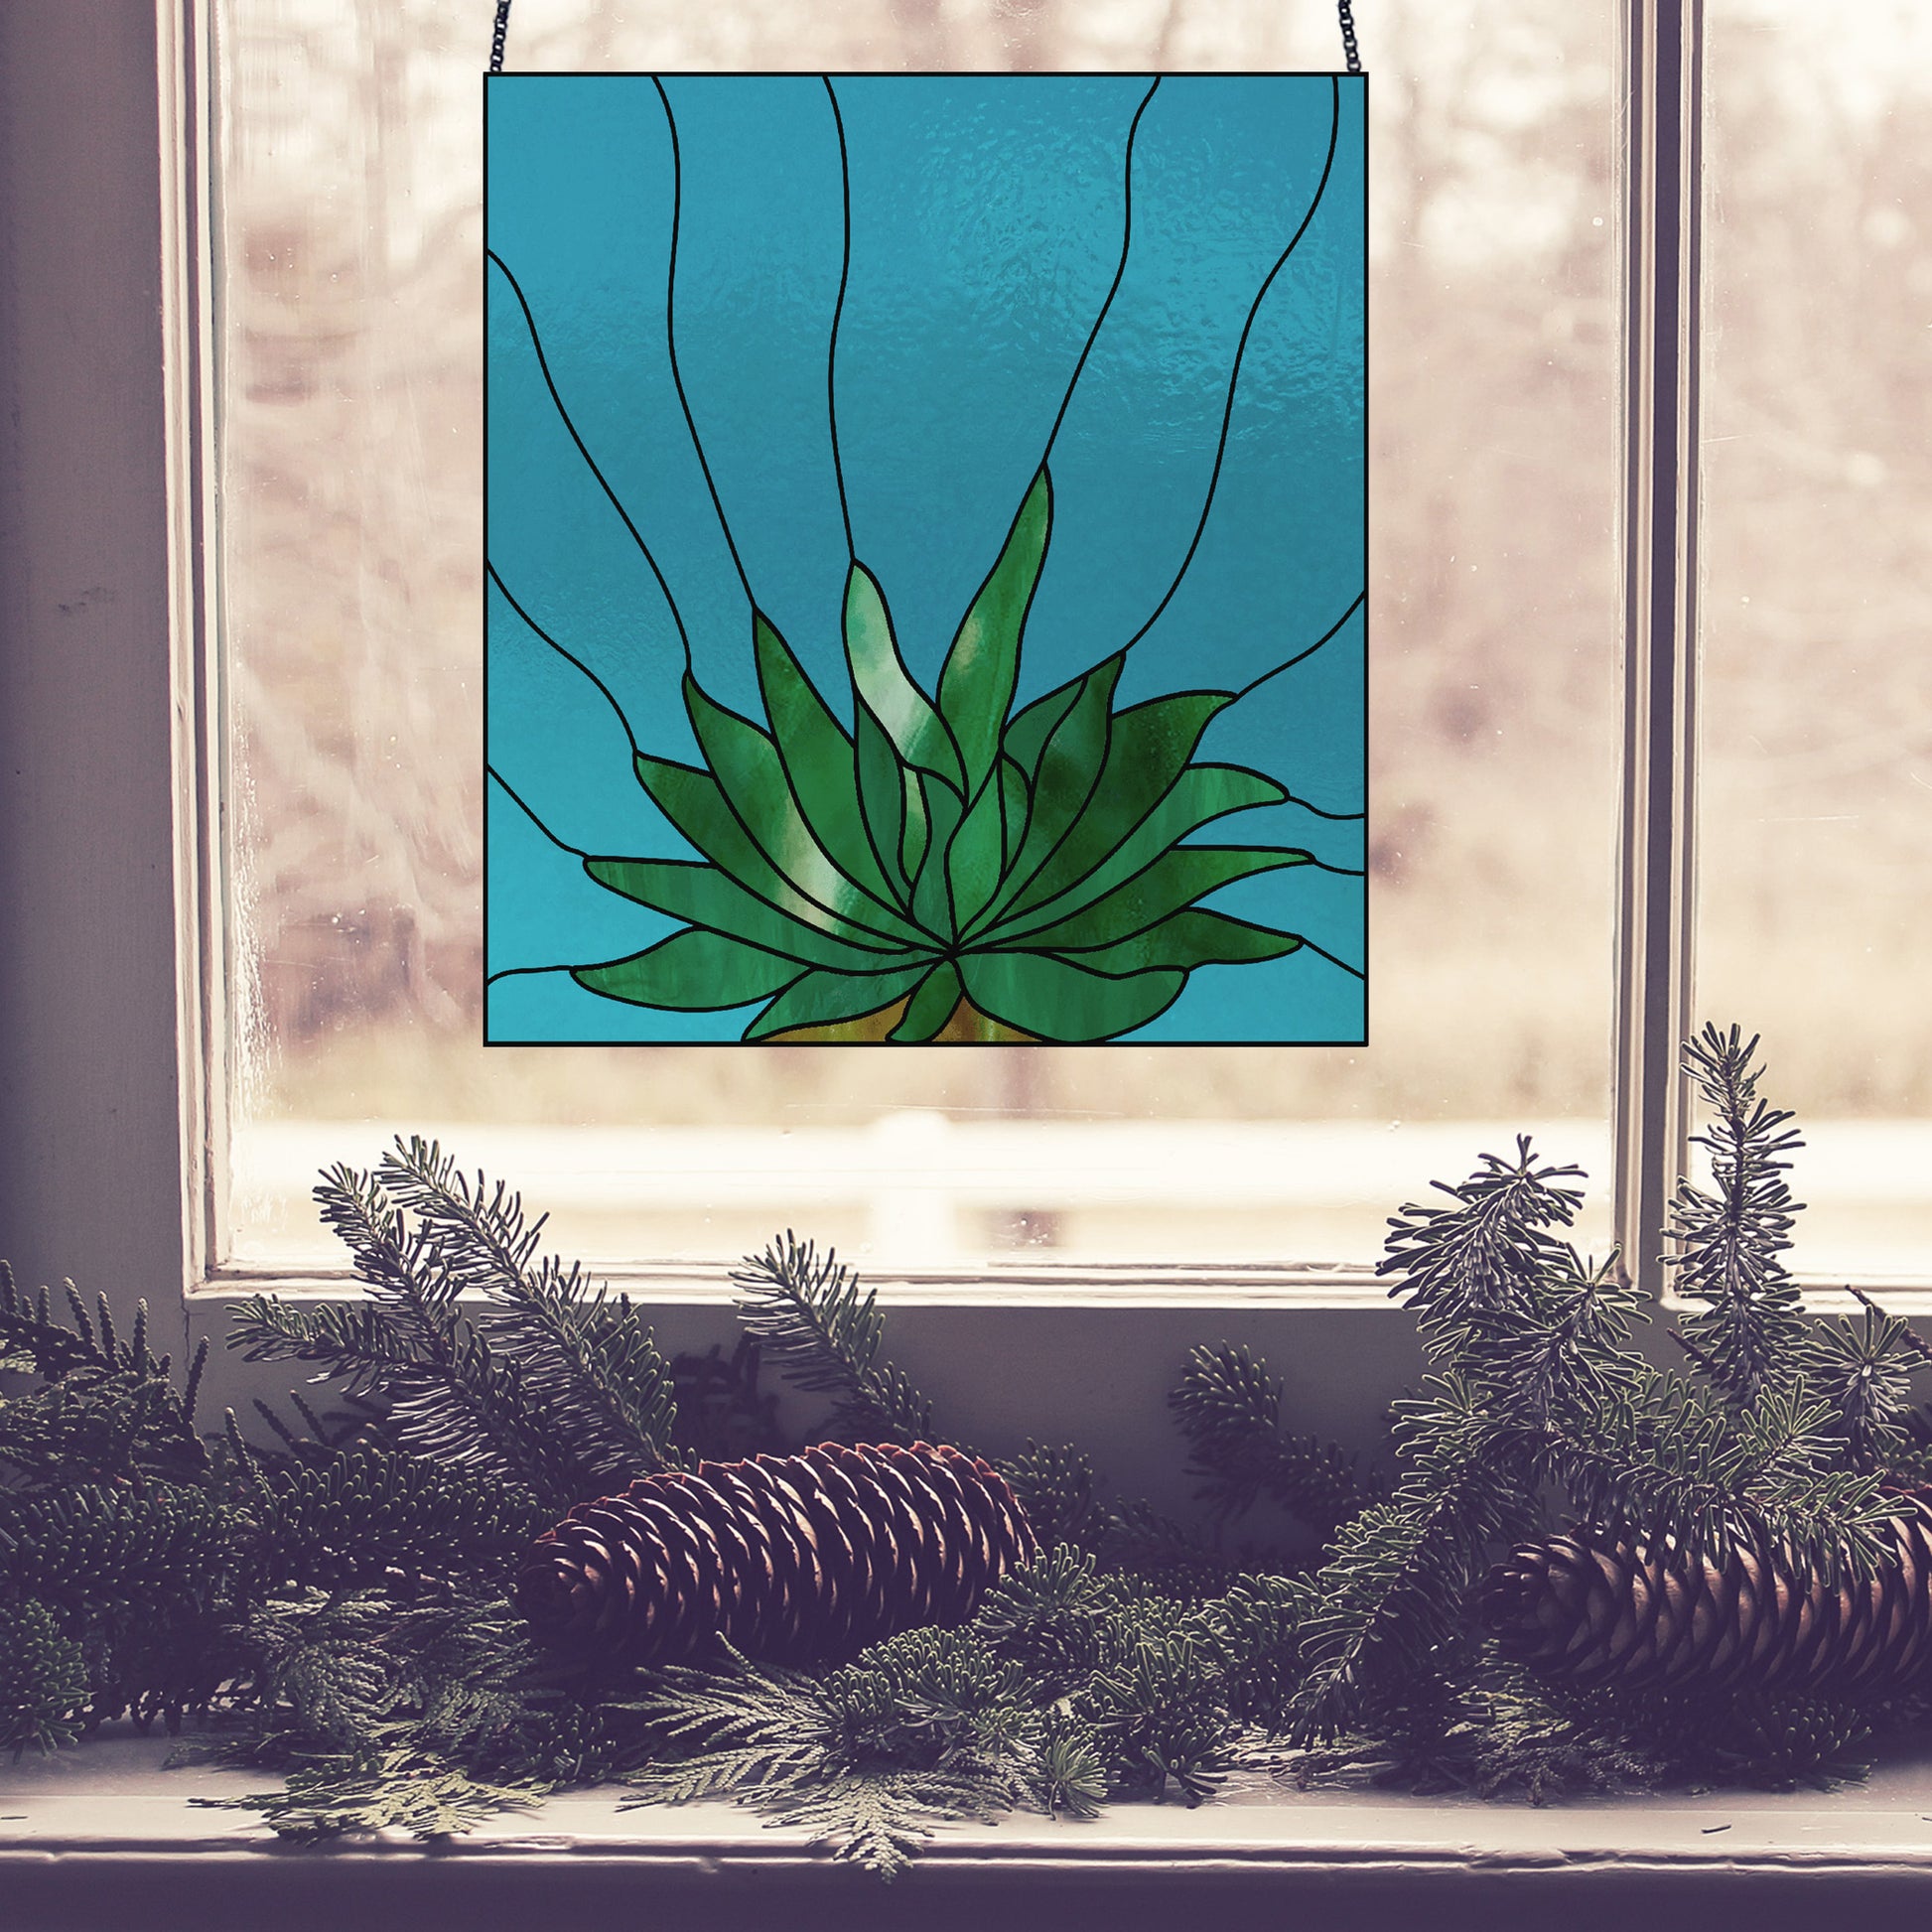 gasteria succulent panel stained glass pattern, instant pdf, shown in window with pine cones